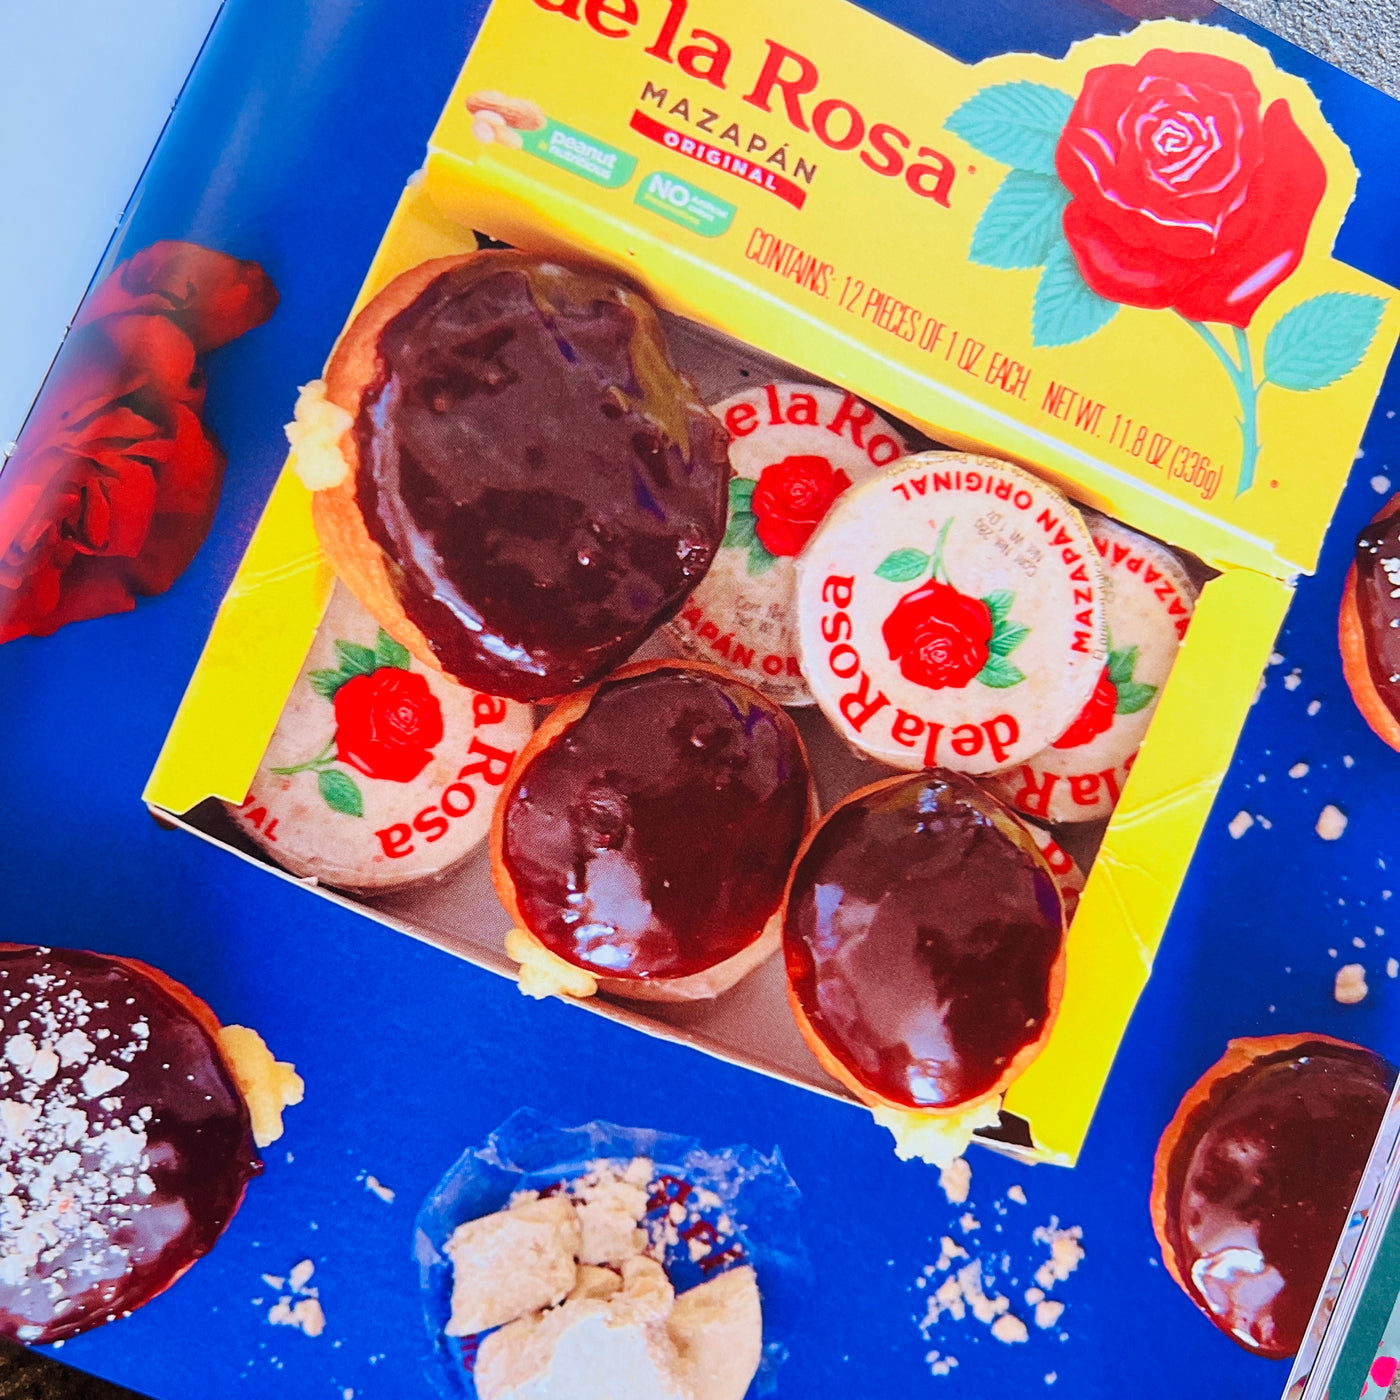 On a blue background is a yellow box of De La Rosa mazapan along with chocolate covered donuts. 